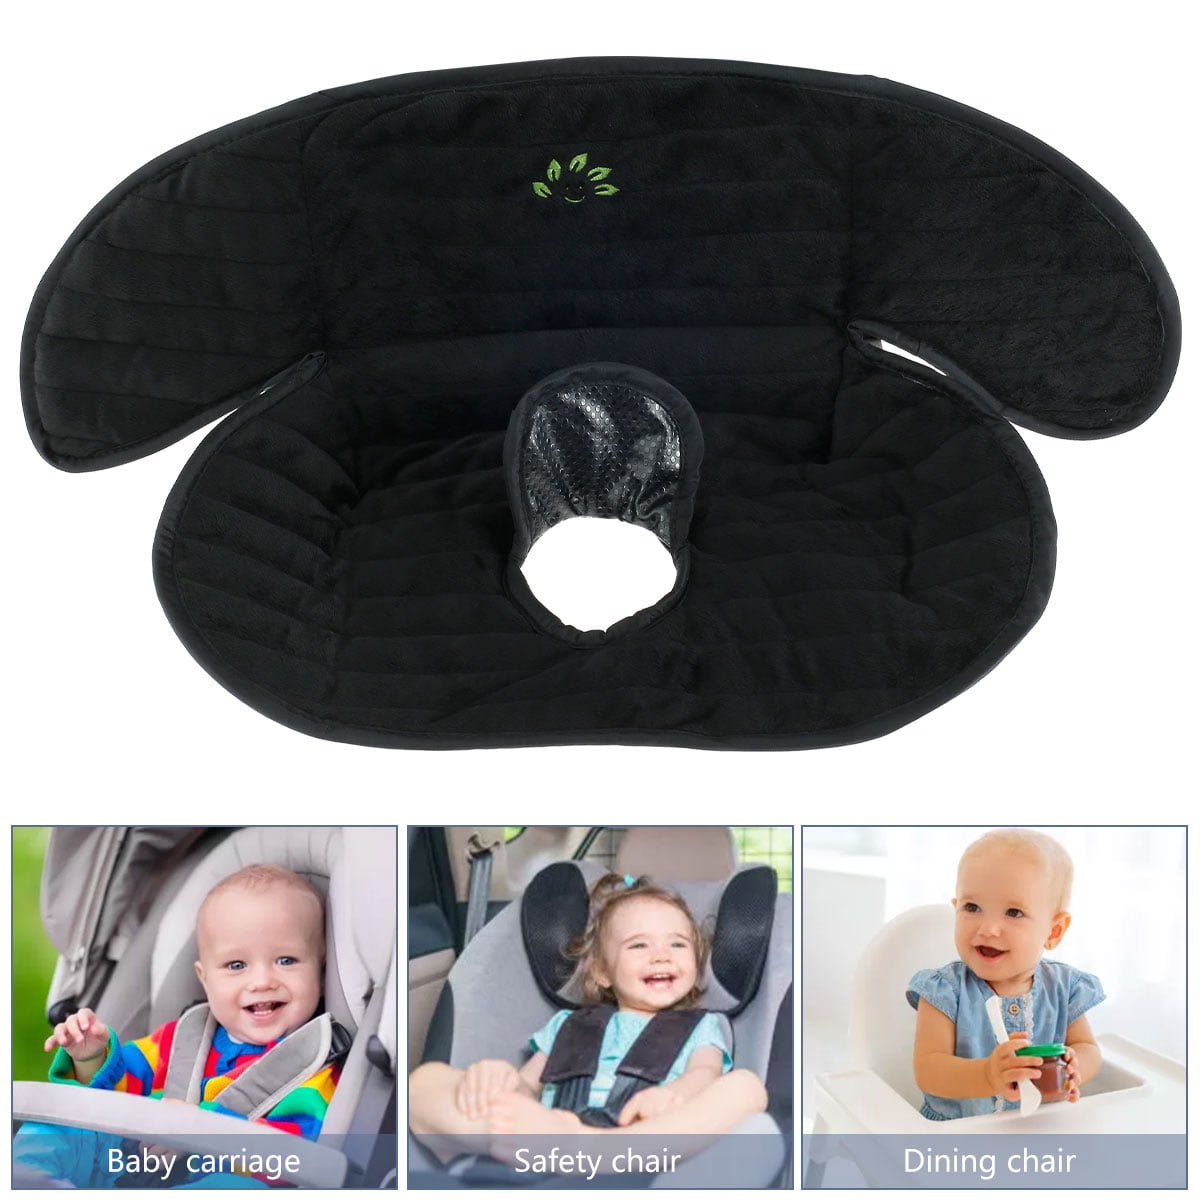 Baby or Infant Car Seat Protector Waterproof Portable Liner Convertible Pads Crash Tested for Carseat Stroller Accessories Machine Washable Seat Saver Piddle Pad for Toilet Potty Training Toddler